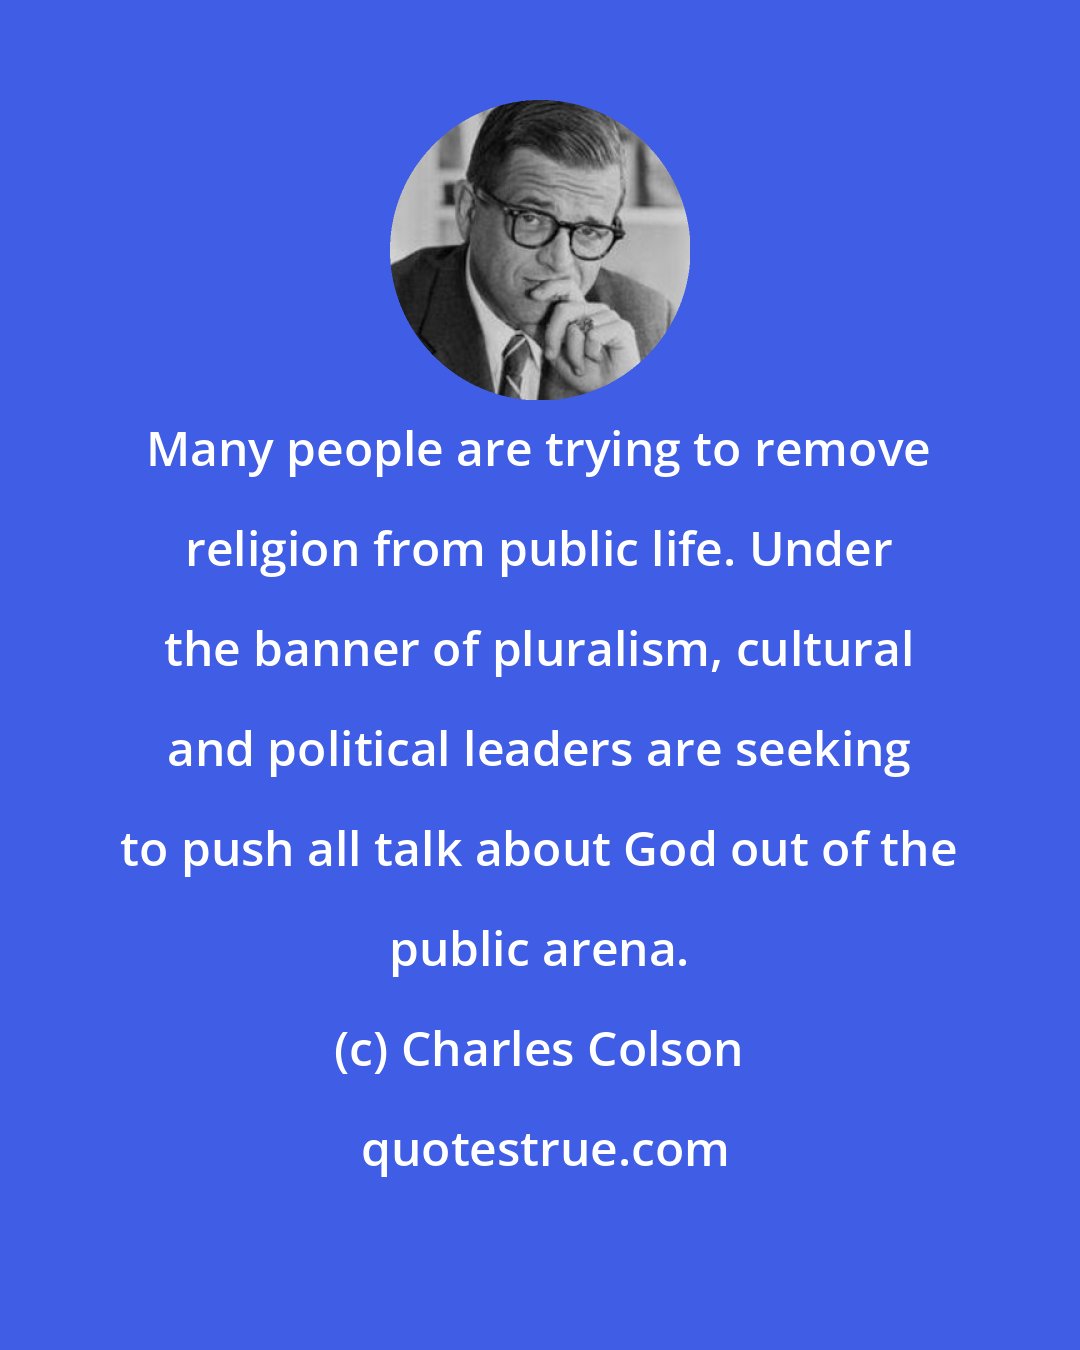 Charles Colson: Many people are trying to remove religion from public life. Under the banner of pluralism, cultural and political leaders are seeking to push all talk about God out of the public arena.